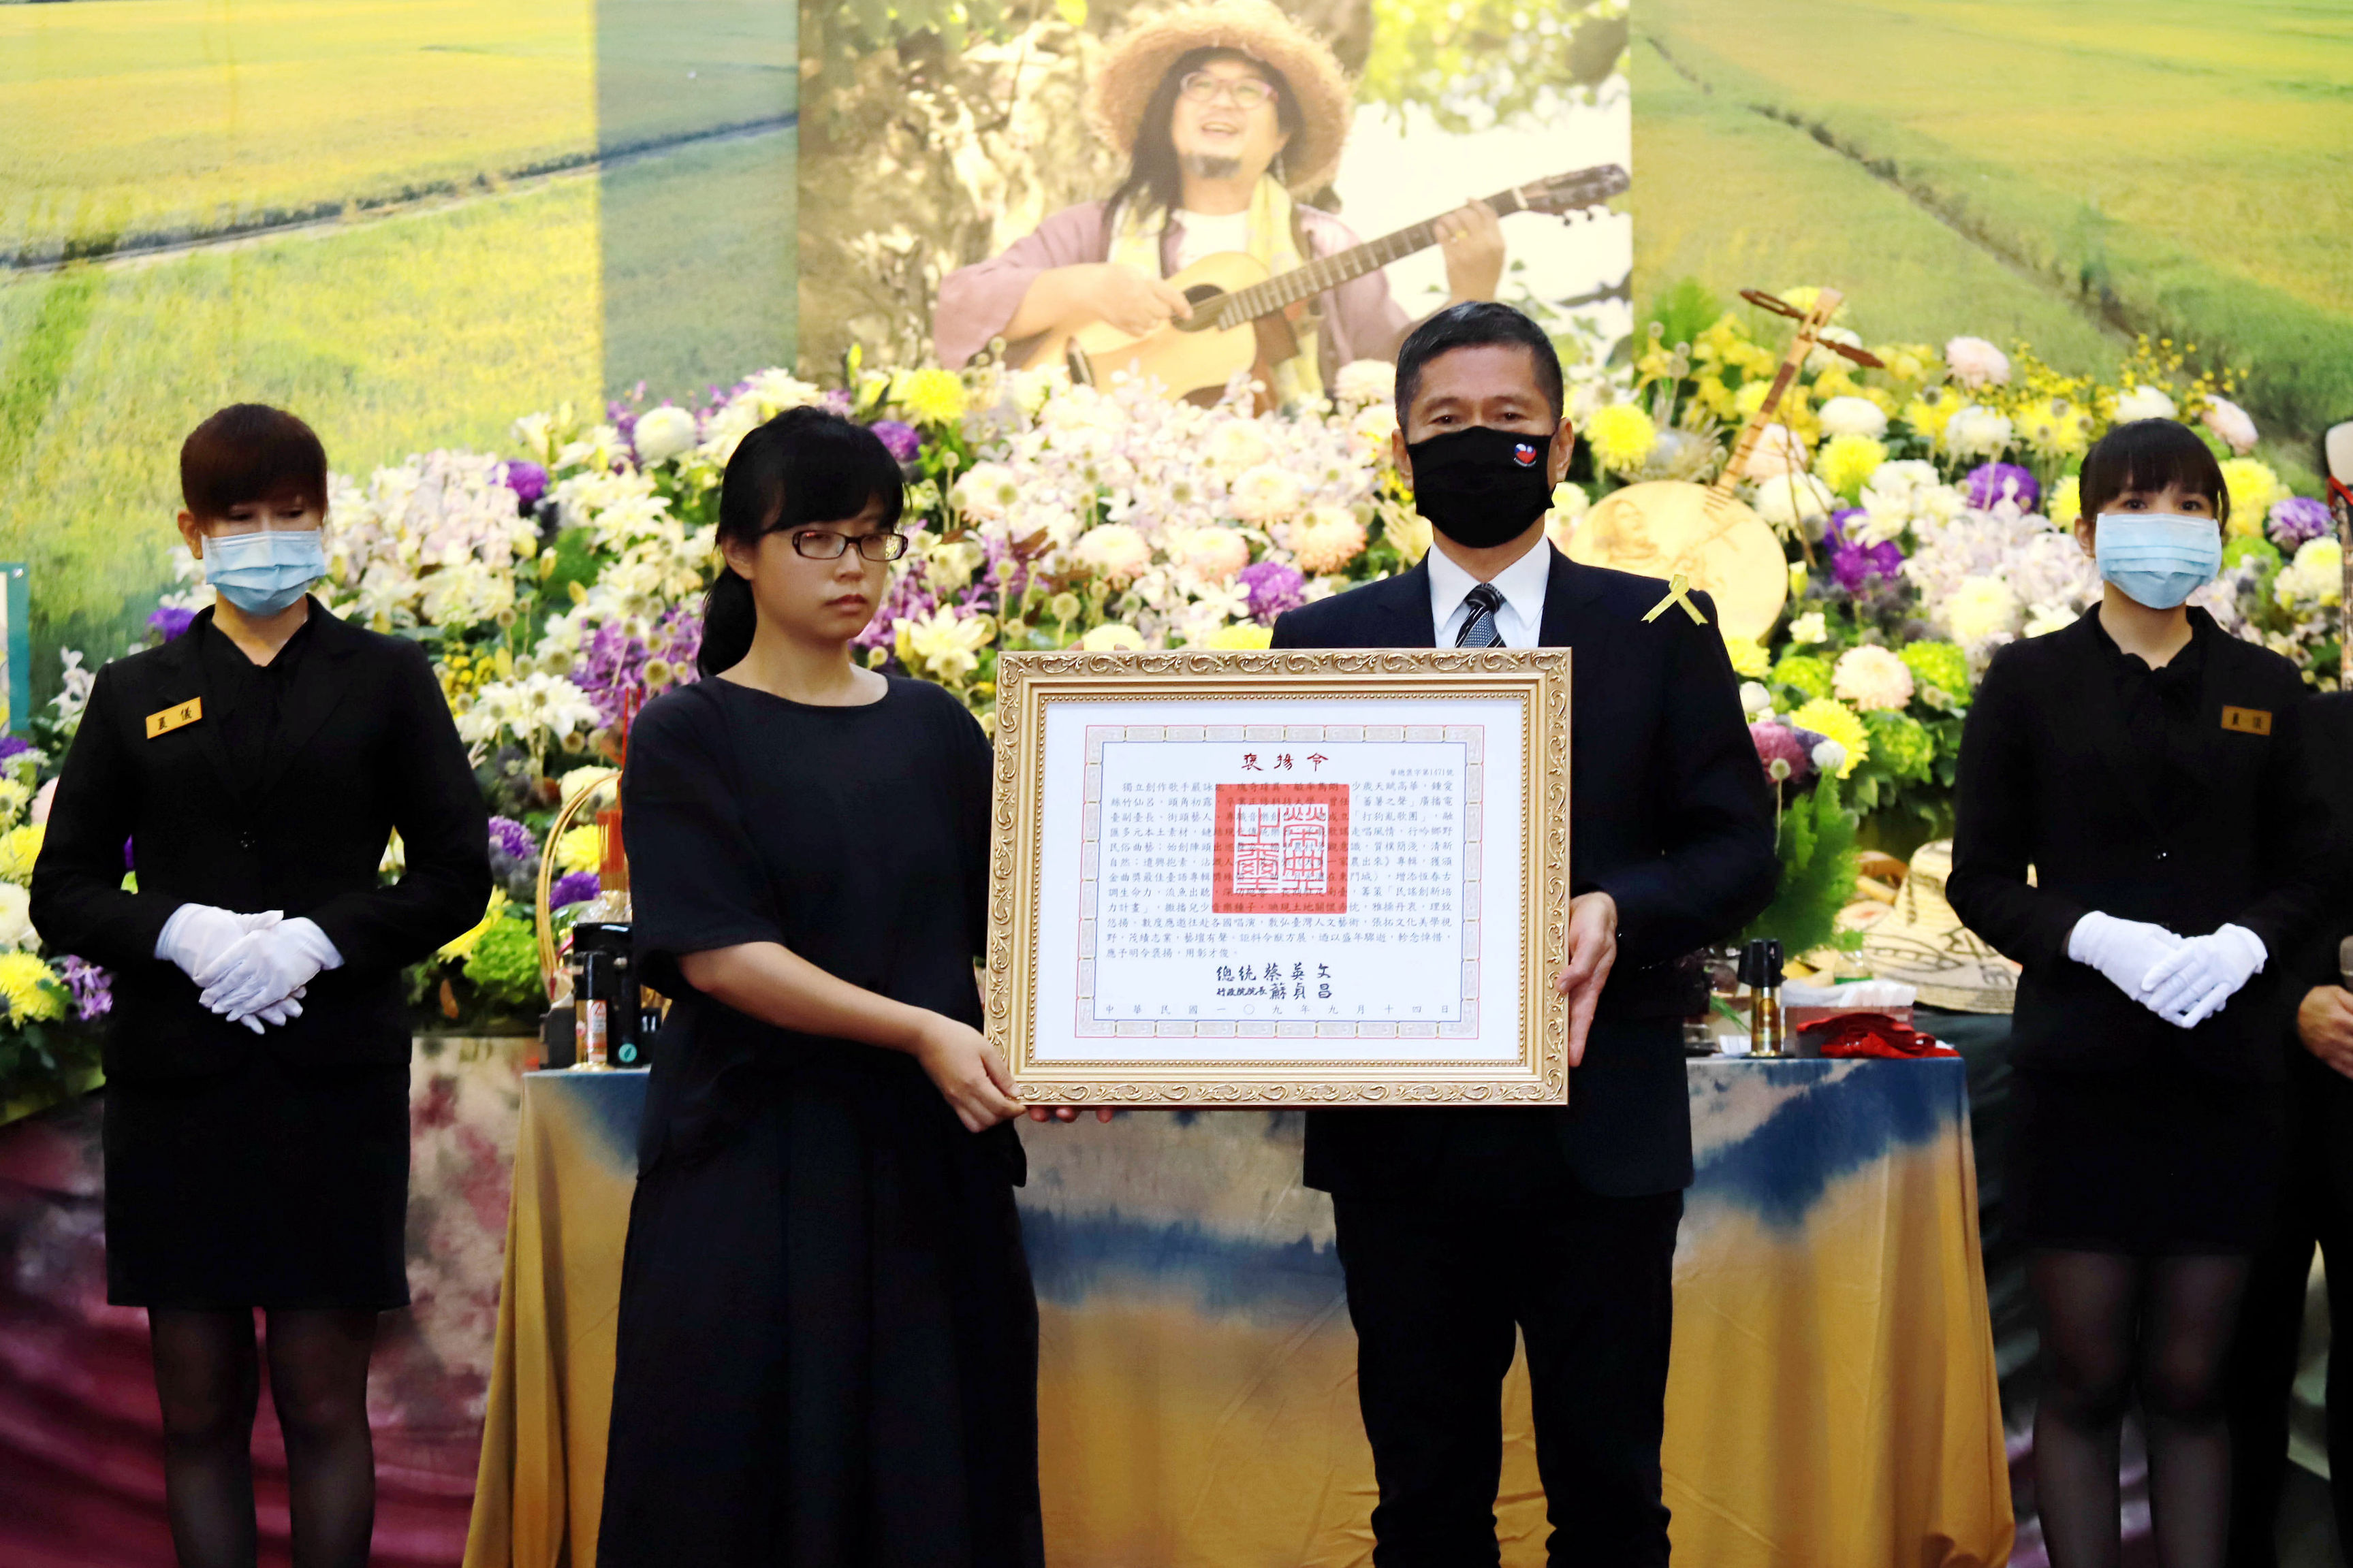 Independent musician Yen Yung-neng conferred posthumous honor by President